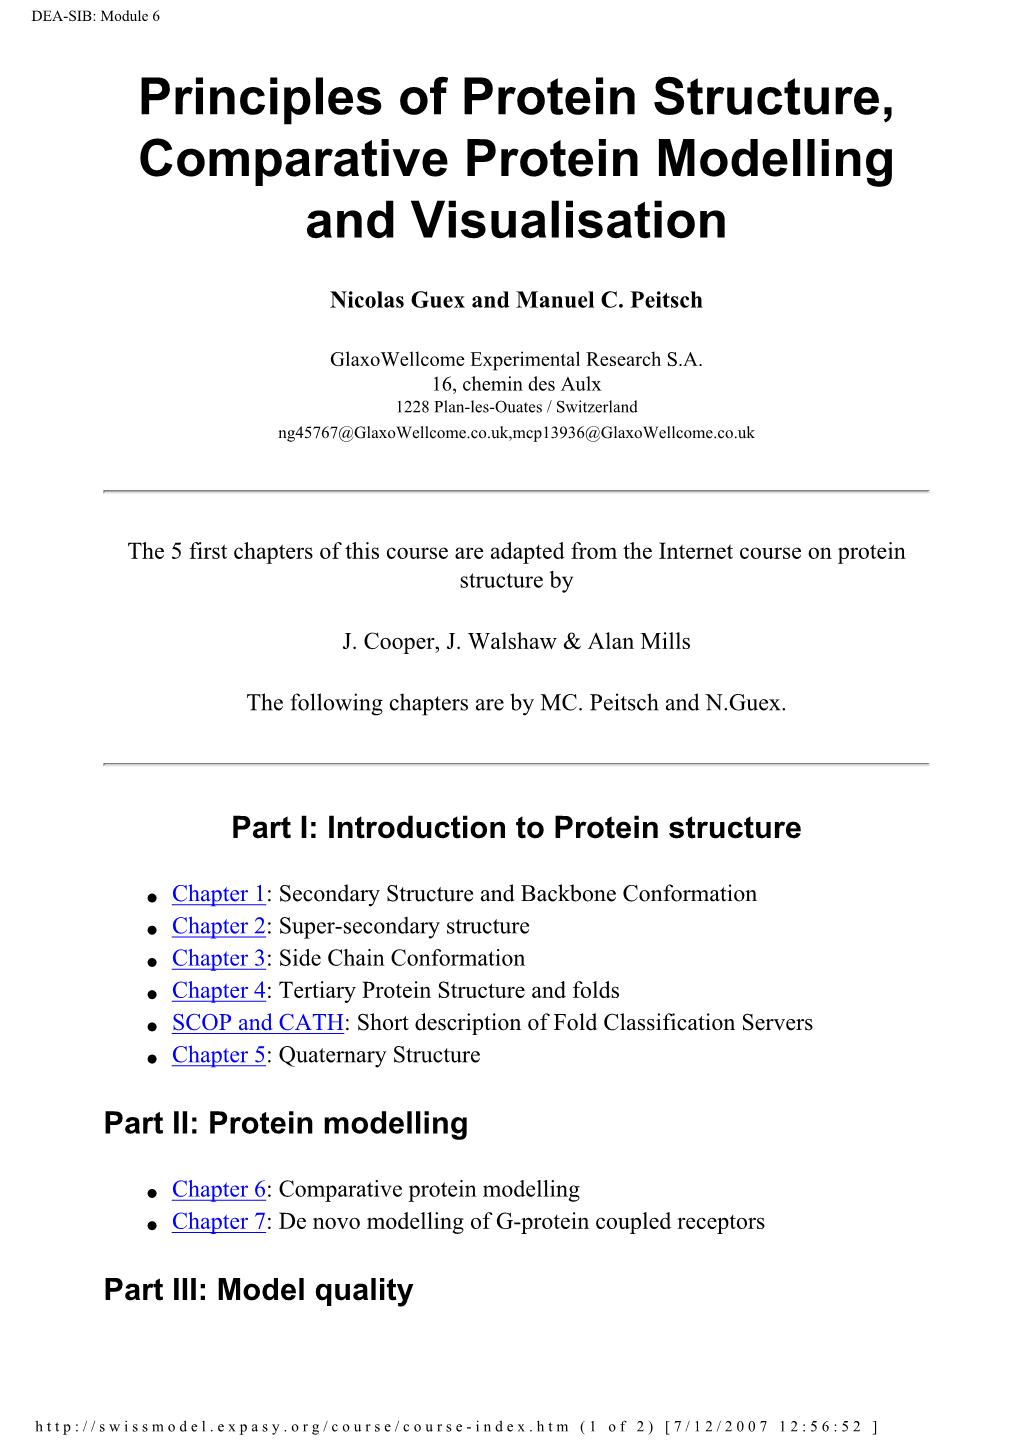 Module 6 Principles of Protein Structure, Comparative Protein Modelling and Visualisation